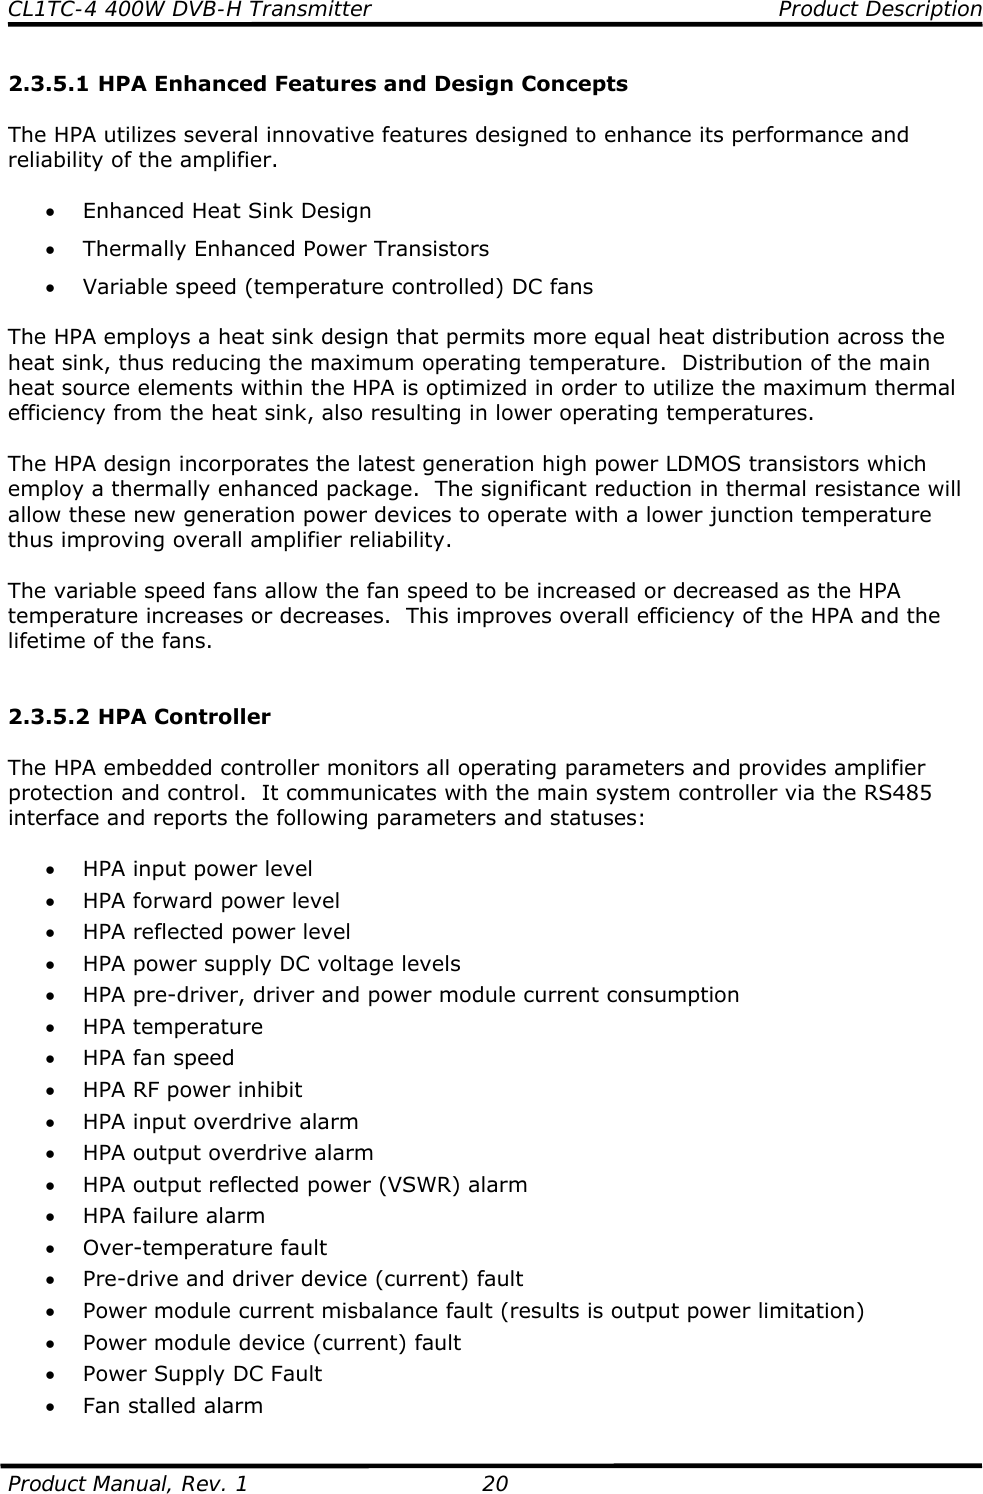 CL1TC-4 400W DVB-H Transmitter    Product Description  Product Manual, Rev. 1  20 2.3.5.1 HPA Enhanced Features and Design Concepts  The HPA utilizes several innovative features designed to enhance its performance and reliability of the amplifier.  • Enhanced Heat Sink Design • Thermally Enhanced Power Transistors • Variable speed (temperature controlled) DC fans  The HPA employs a heat sink design that permits more equal heat distribution across the heat sink, thus reducing the maximum operating temperature.  Distribution of the main heat source elements within the HPA is optimized in order to utilize the maximum thermal efficiency from the heat sink, also resulting in lower operating temperatures.  The HPA design incorporates the latest generation high power LDMOS transistors which employ a thermally enhanced package.  The significant reduction in thermal resistance will allow these new generation power devices to operate with a lower junction temperature thus improving overall amplifier reliability.  The variable speed fans allow the fan speed to be increased or decreased as the HPA temperature increases or decreases.  This improves overall efficiency of the HPA and the lifetime of the fans.   2.3.5.2 HPA Controller  The HPA embedded controller monitors all operating parameters and provides amplifier protection and control.  It communicates with the main system controller via the RS485 interface and reports the following parameters and statuses:  • HPA input power level • HPA forward power level • HPA reflected power level • HPA power supply DC voltage levels • HPA pre-driver, driver and power module current consumption • HPA temperature • HPA fan speed • HPA RF power inhibit • HPA input overdrive alarm • HPA output overdrive alarm • HPA output reflected power (VSWR) alarm • HPA failure alarm • Over-temperature fault • Pre-drive and driver device (current) fault • Power module current misbalance fault (results is output power limitation) • Power module device (current) fault • Power Supply DC Fault • Fan stalled alarm 